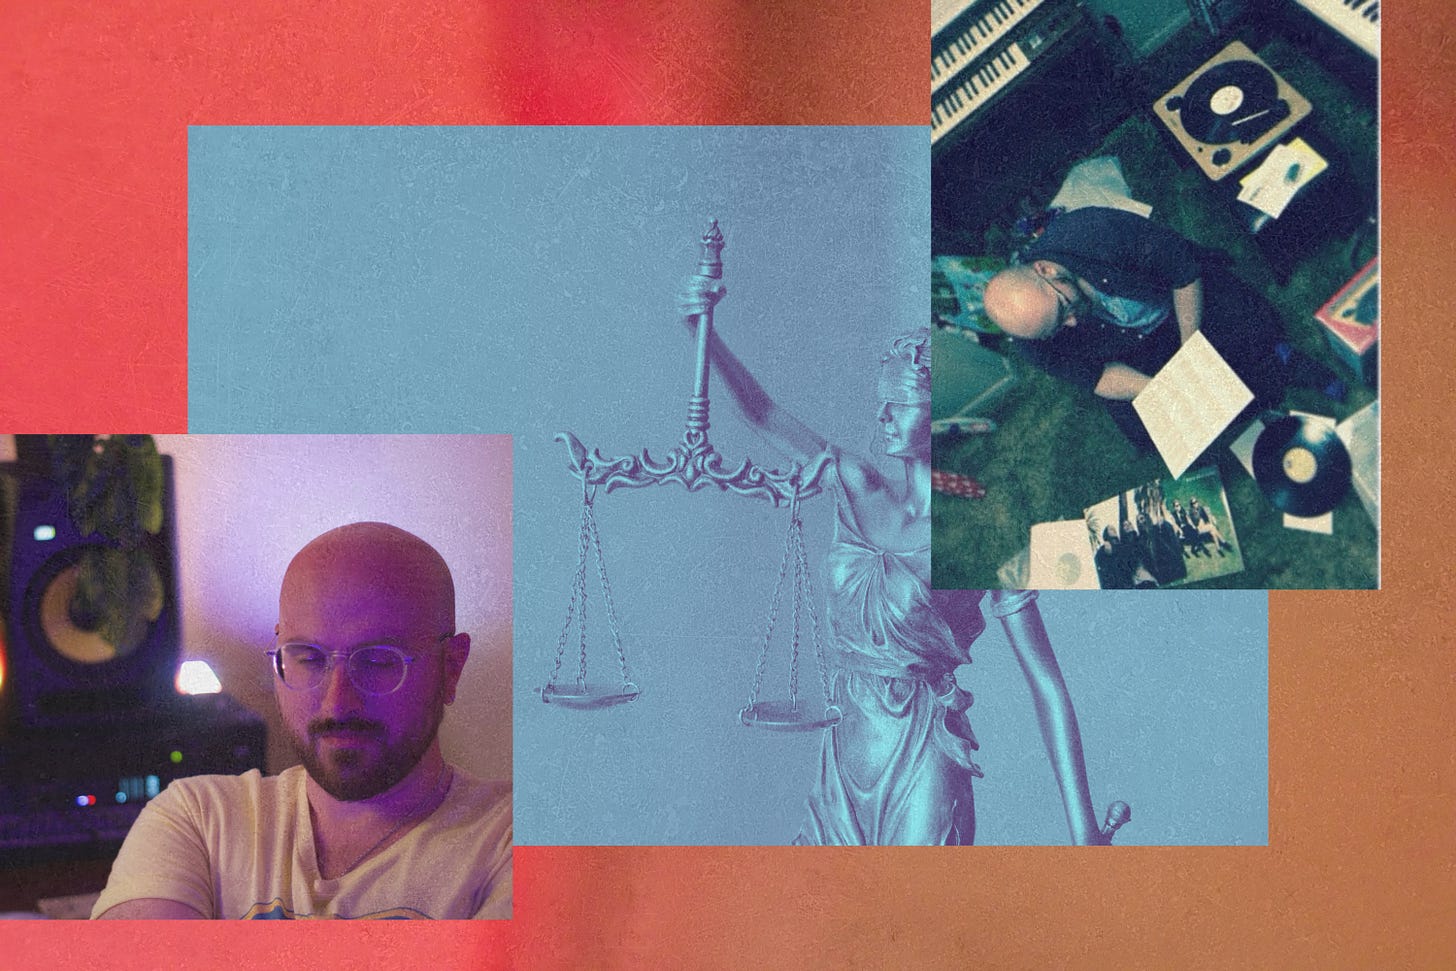 collage with an image of me listening to the left, an image with a statue holding a set of scales in the middle, and an image of me reading a record sleeve to the right.